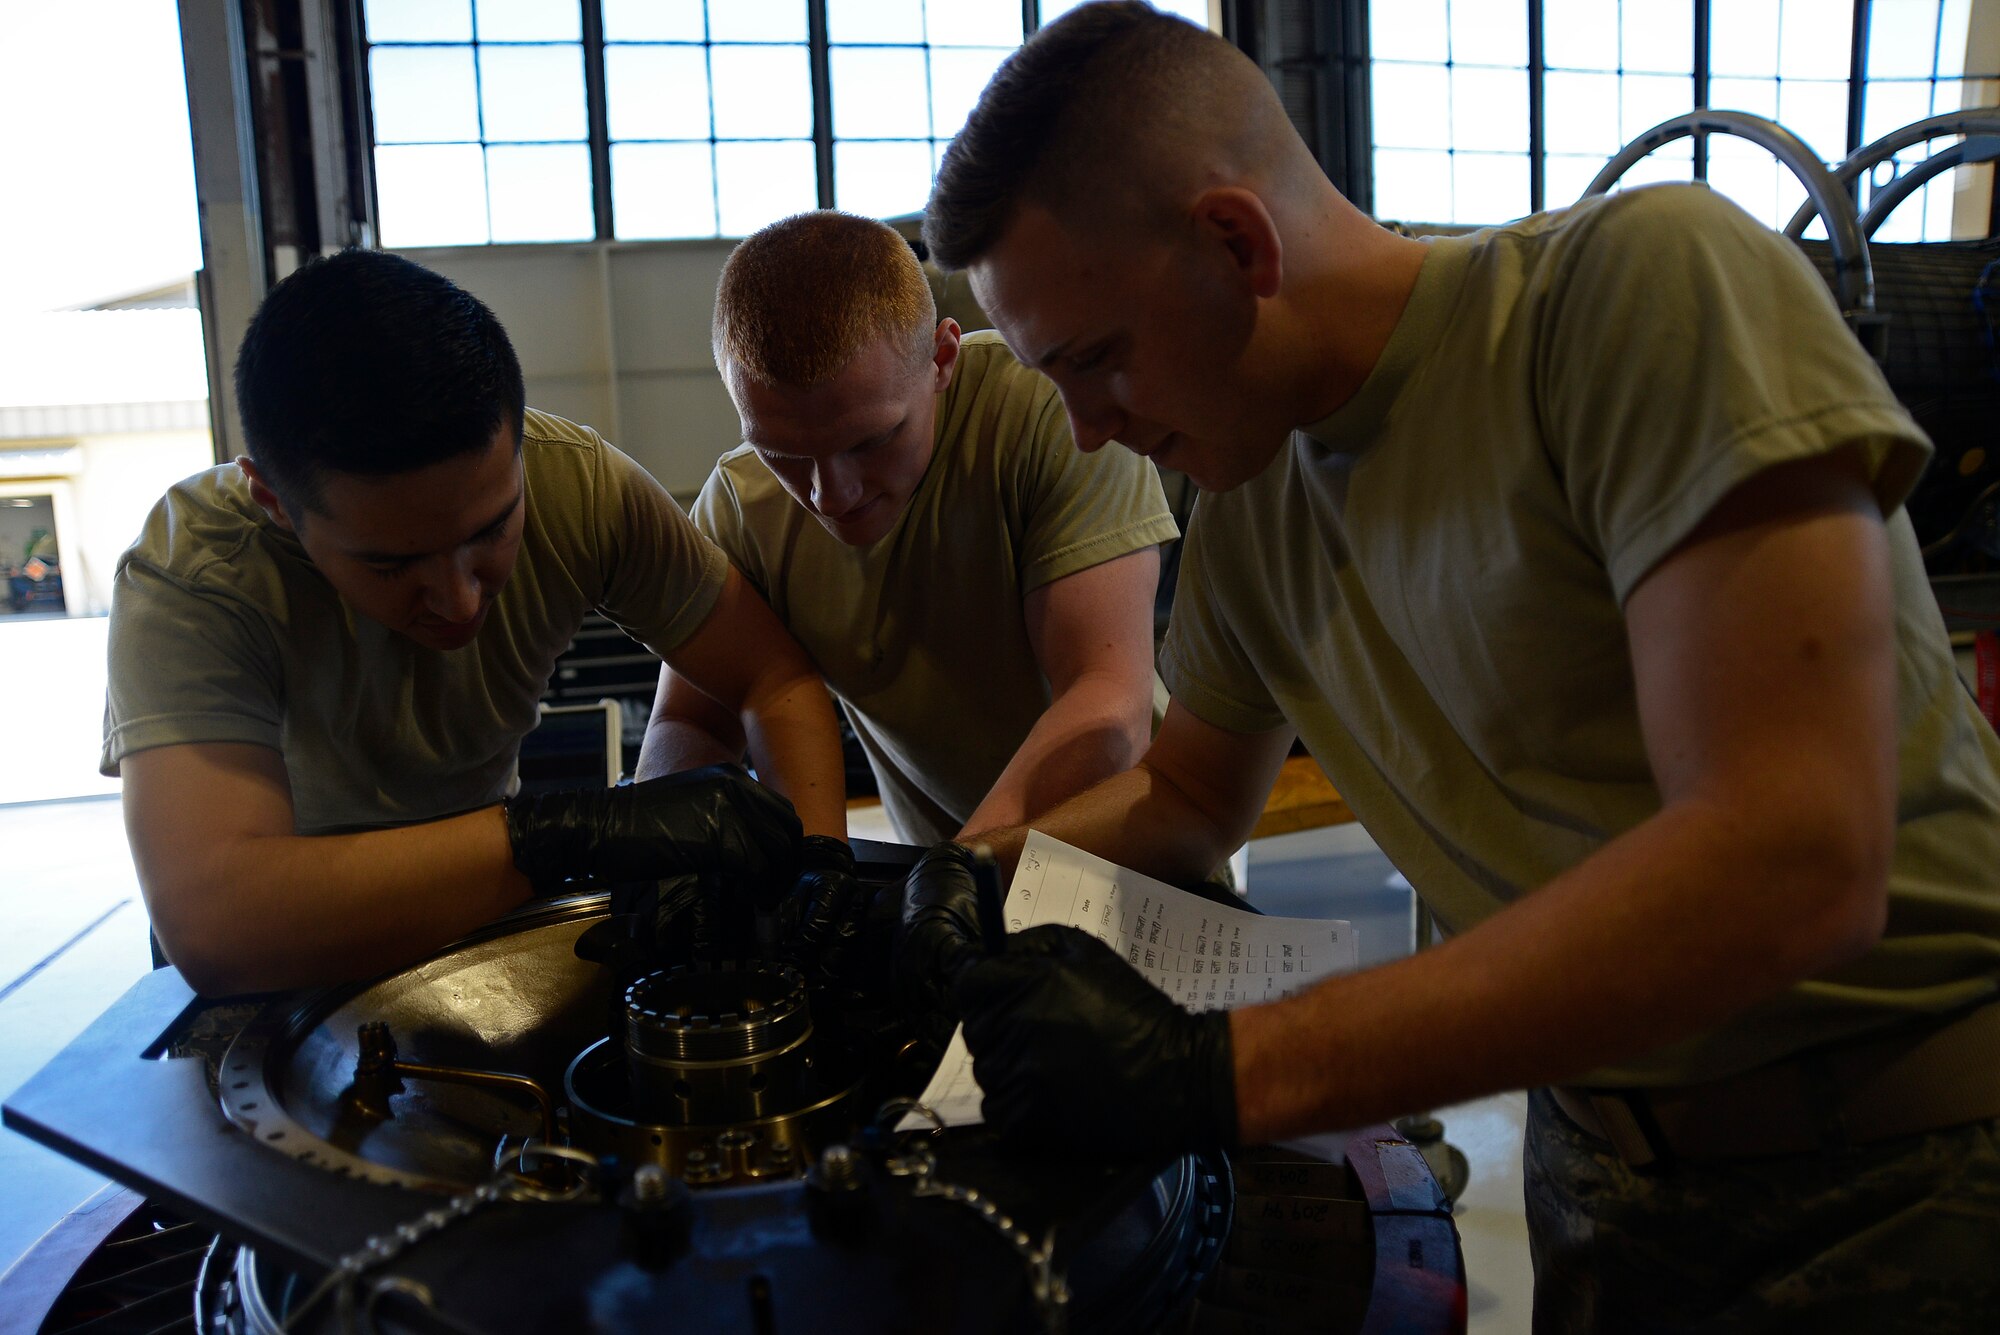 U.S. Air Force Airman 1st Class Jesus Ortega 20th Component Maintenance Squadron (CMS) aerospace propulsion journeyman, left, Airman 1st Class Caleb Gulley, center, and Airman 1st Class Andrew Setrin, right, 20th CMS aerospace propulsion apprentices, work together on the number two sump housing at Shaw Air Force Base, S.C., March 29, 2017. The number two sump housing works with the number three sump housing as the support fan and core compressor rotors for the F110-129D engine. (U.S. Air Force photo by Airman 1st Class BrieAnna Stillman)